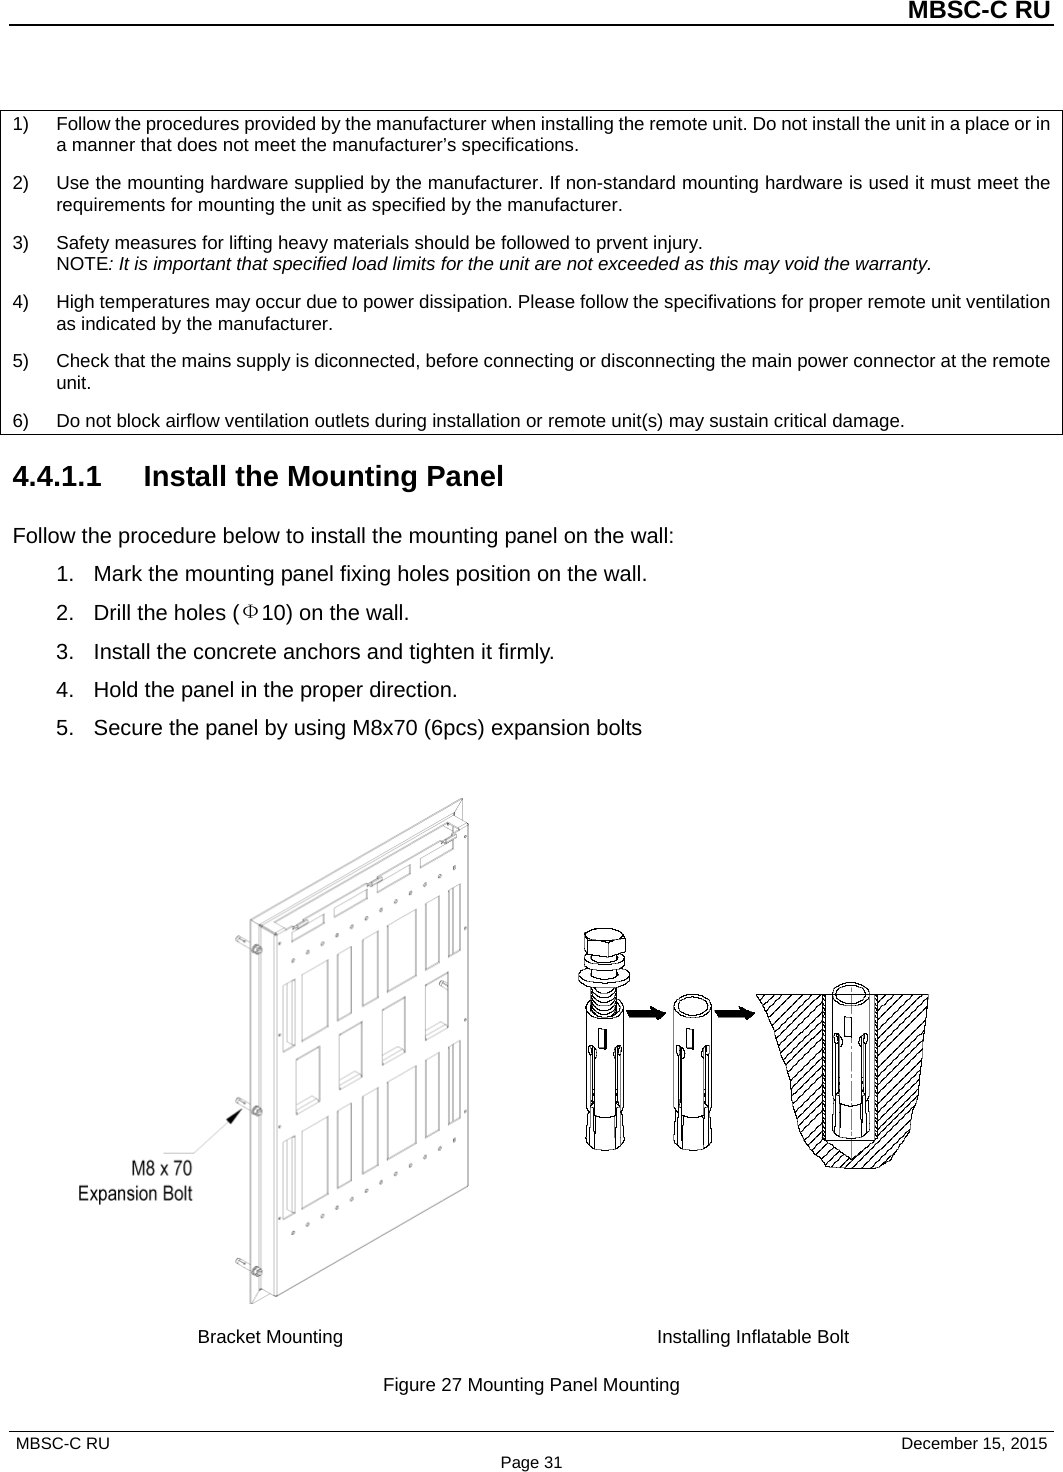 MBSC-C RU MBSC-C RU   December 15, 2015 Page 311) Follow the procedures provided by the manufacturer when installing the remote unit. Do not install the unit in a place or ina manner that does not meet the manufacturer’s specifications.2) Use the mounting hardware supplied by the manufacturer. If non-standard mounting hardware is used it must meet therequirements for mounting the unit as specified by the manufacturer.3) Safety measures for lifting heavy materials should be followed to prvent injury.NOTE: It is important that specified load limits for the unit are not exceeded as this may void the warranty.4) High temperatures may occur due to power dissipation. Please follow the specifivations for proper remote unit ventilationas indicated by the manufacturer.5) Check that the mains supply is diconnected, before connecting or disconnecting the main power connector at the remoteunit.6) Do not block airflow ventilation outlets during installation or remote unit(s) may sustain critical damage.4.4.1.1  Install the Mounting Panel Follow the procedure below to install the mounting panel on the wall: 1. Mark the mounting panel fixing holes position on the wall.2. Drill the holes (Ф10) on the wall.3. Install the concrete anchors and tighten it firmly.4. Hold the panel in the proper direction.5. Secure the panel by using M8x70 (6pcs) expansion boltsBracket Mounting Installing Inflatable Bolt Figure 27 Mounting Panel Mounting 